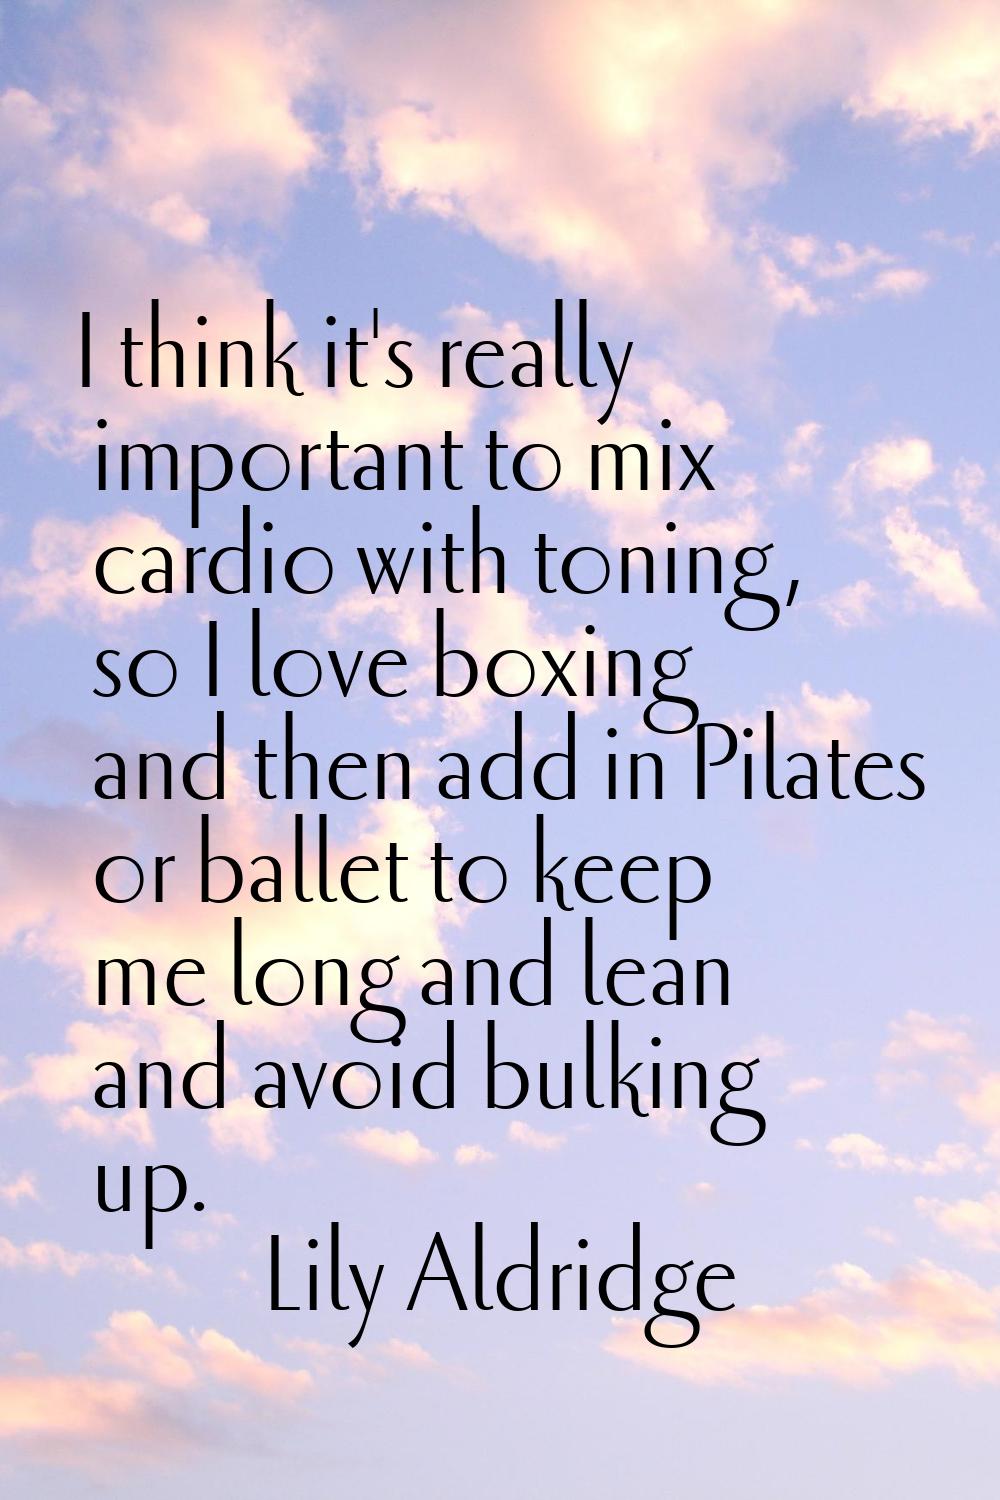 I think it's really important to mix cardio with toning, so I love boxing and then add in Pilates o